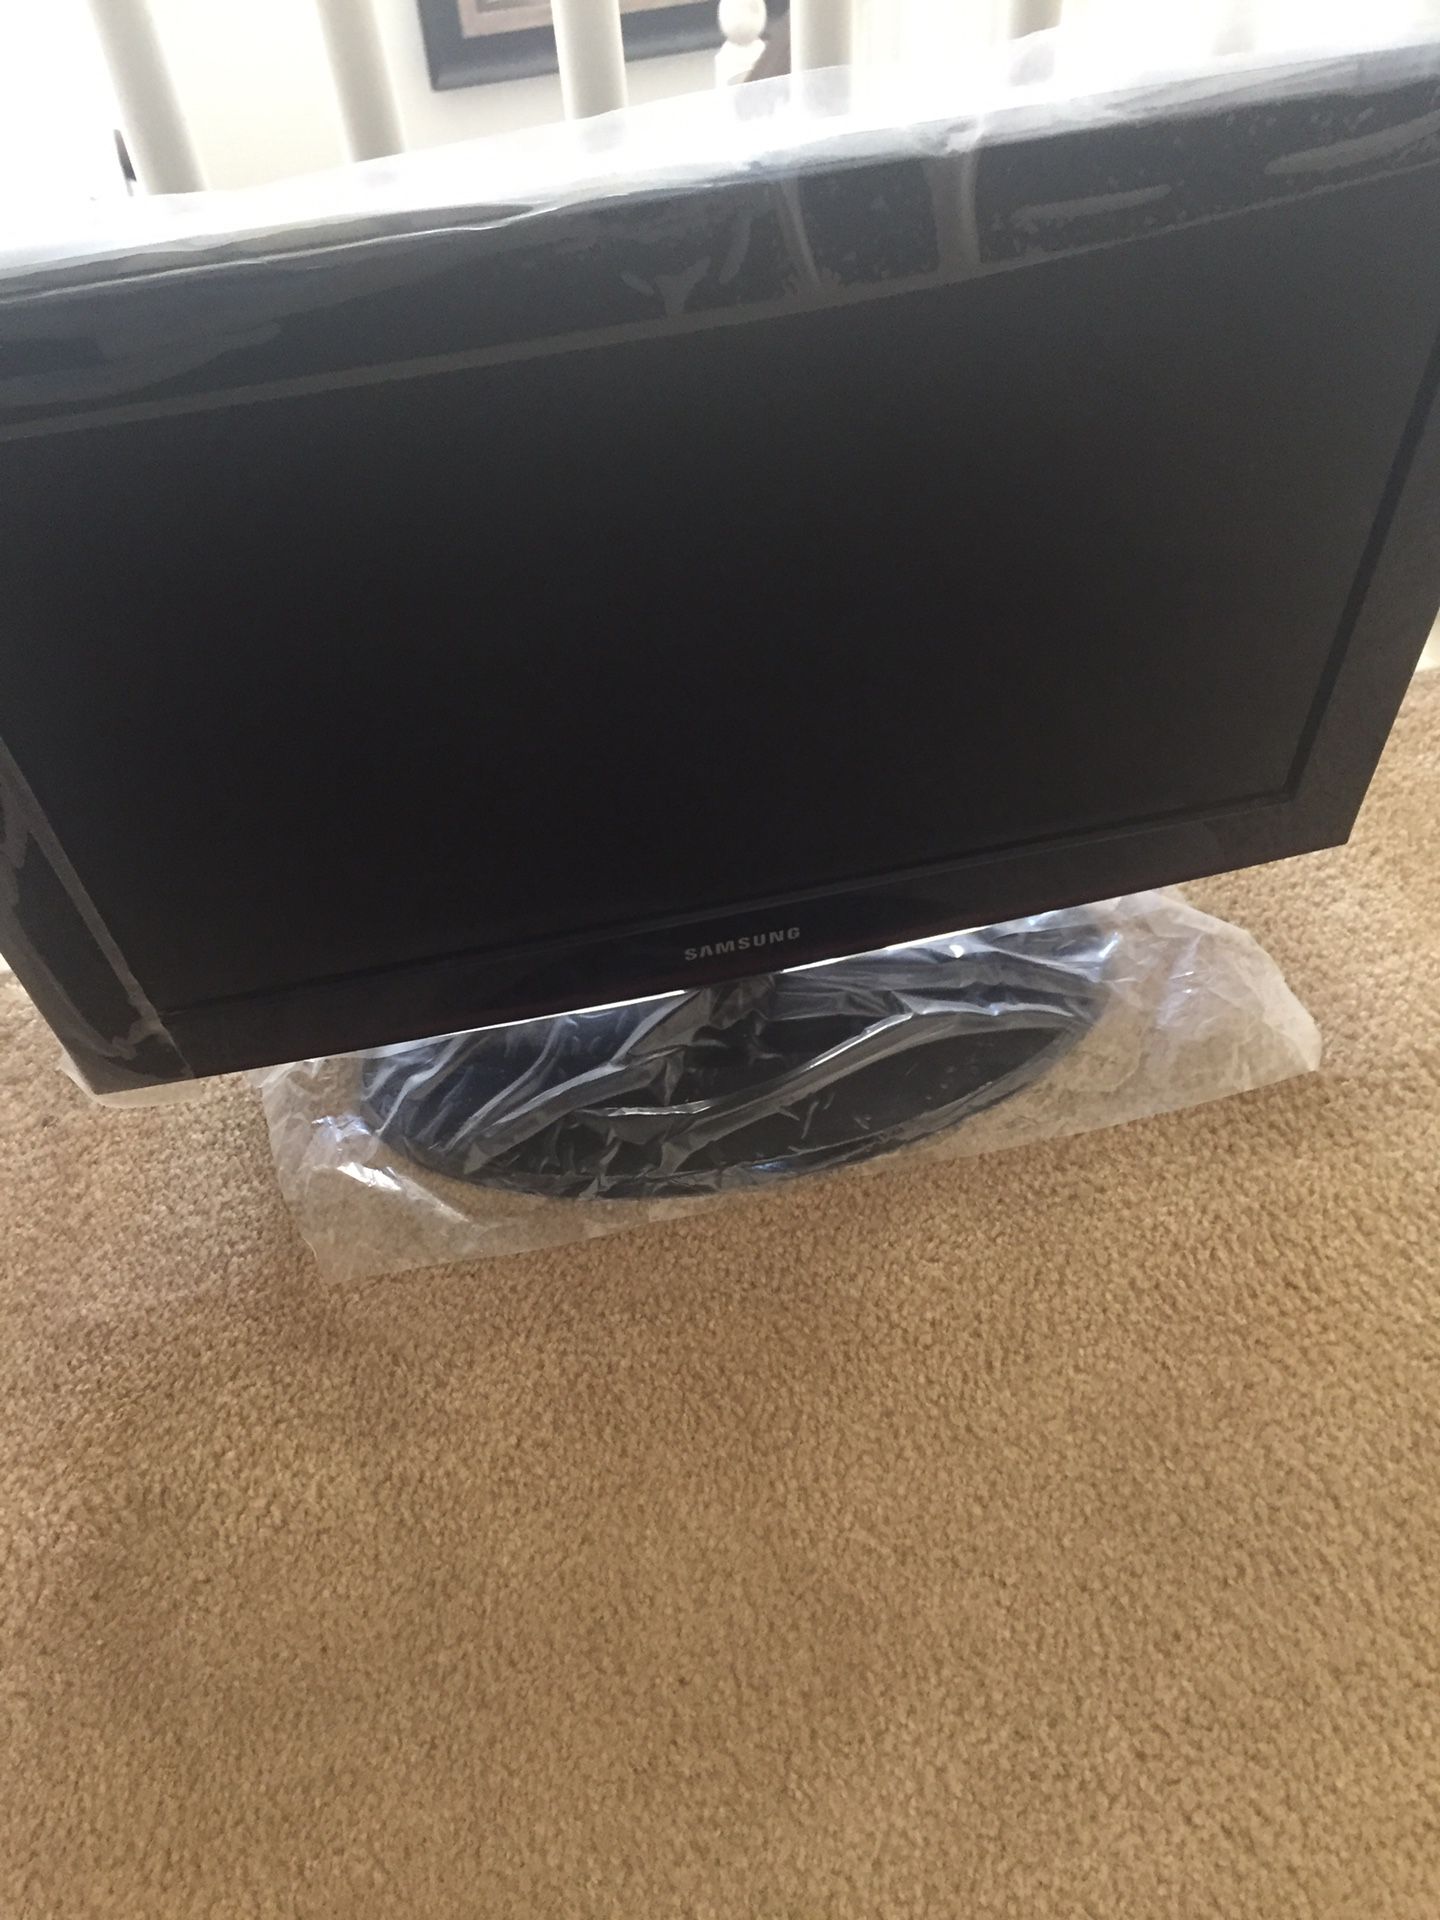 Samsung 36 inch TV, never used. $150.00